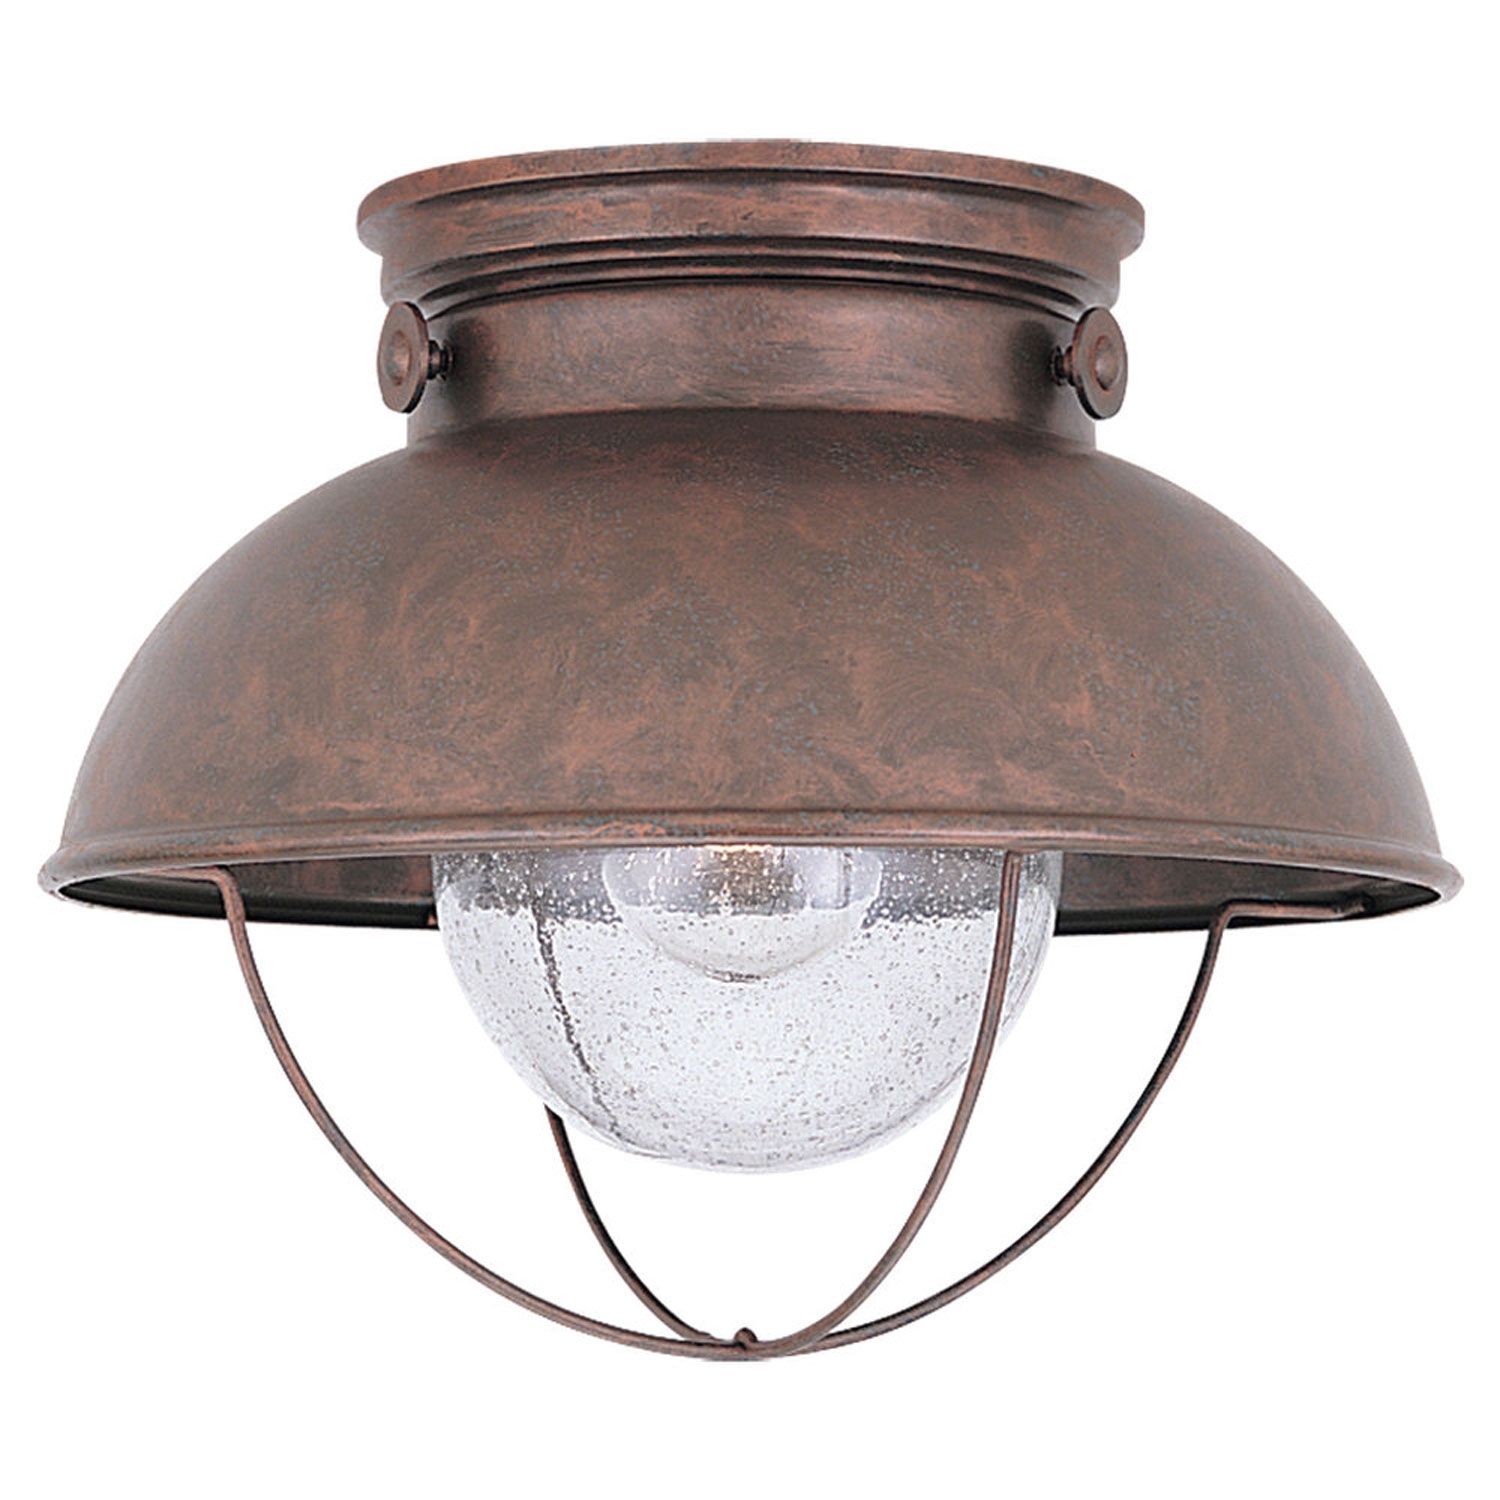 Sea Gull Lighting Sebring Weathered Copper Outdoor Ceiling Light On Sale For Outdoor Ceiling Lighting Fixtures (Photo 2 of 15)